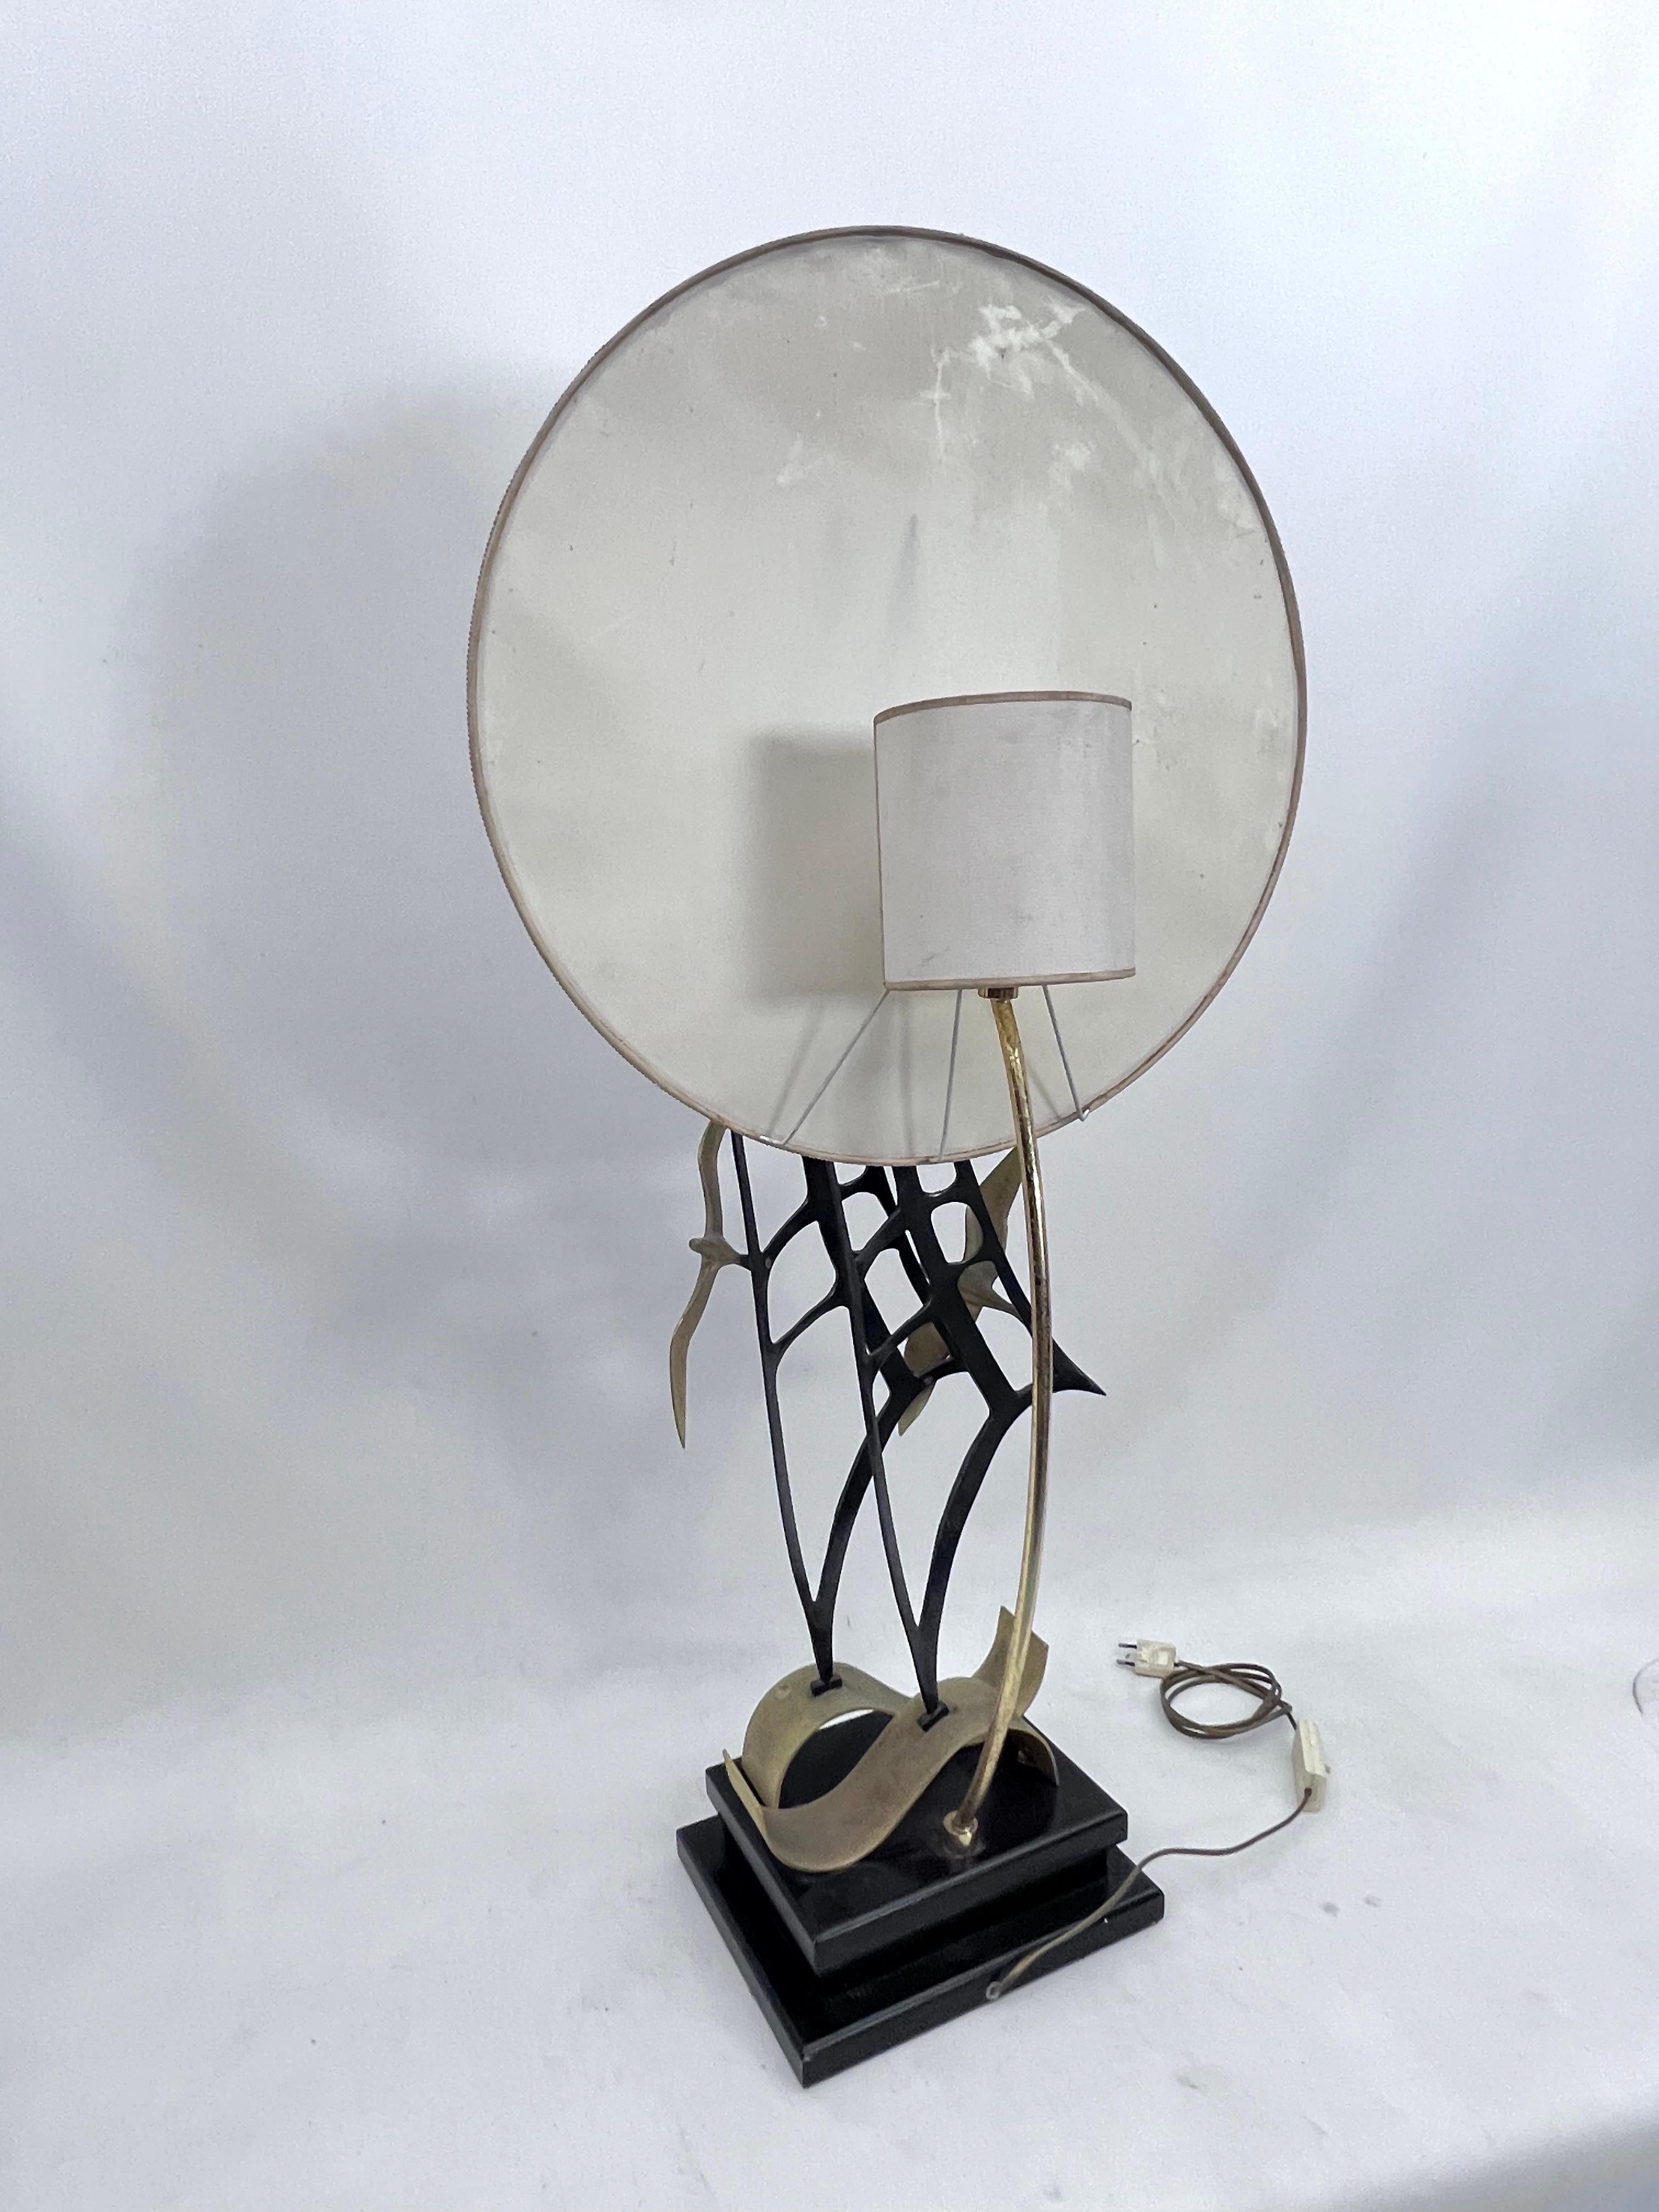 Lanciotto Galeotti, Midcentury Gold-Plated Italian Lamp by L'Originale, 1970s For Sale 5